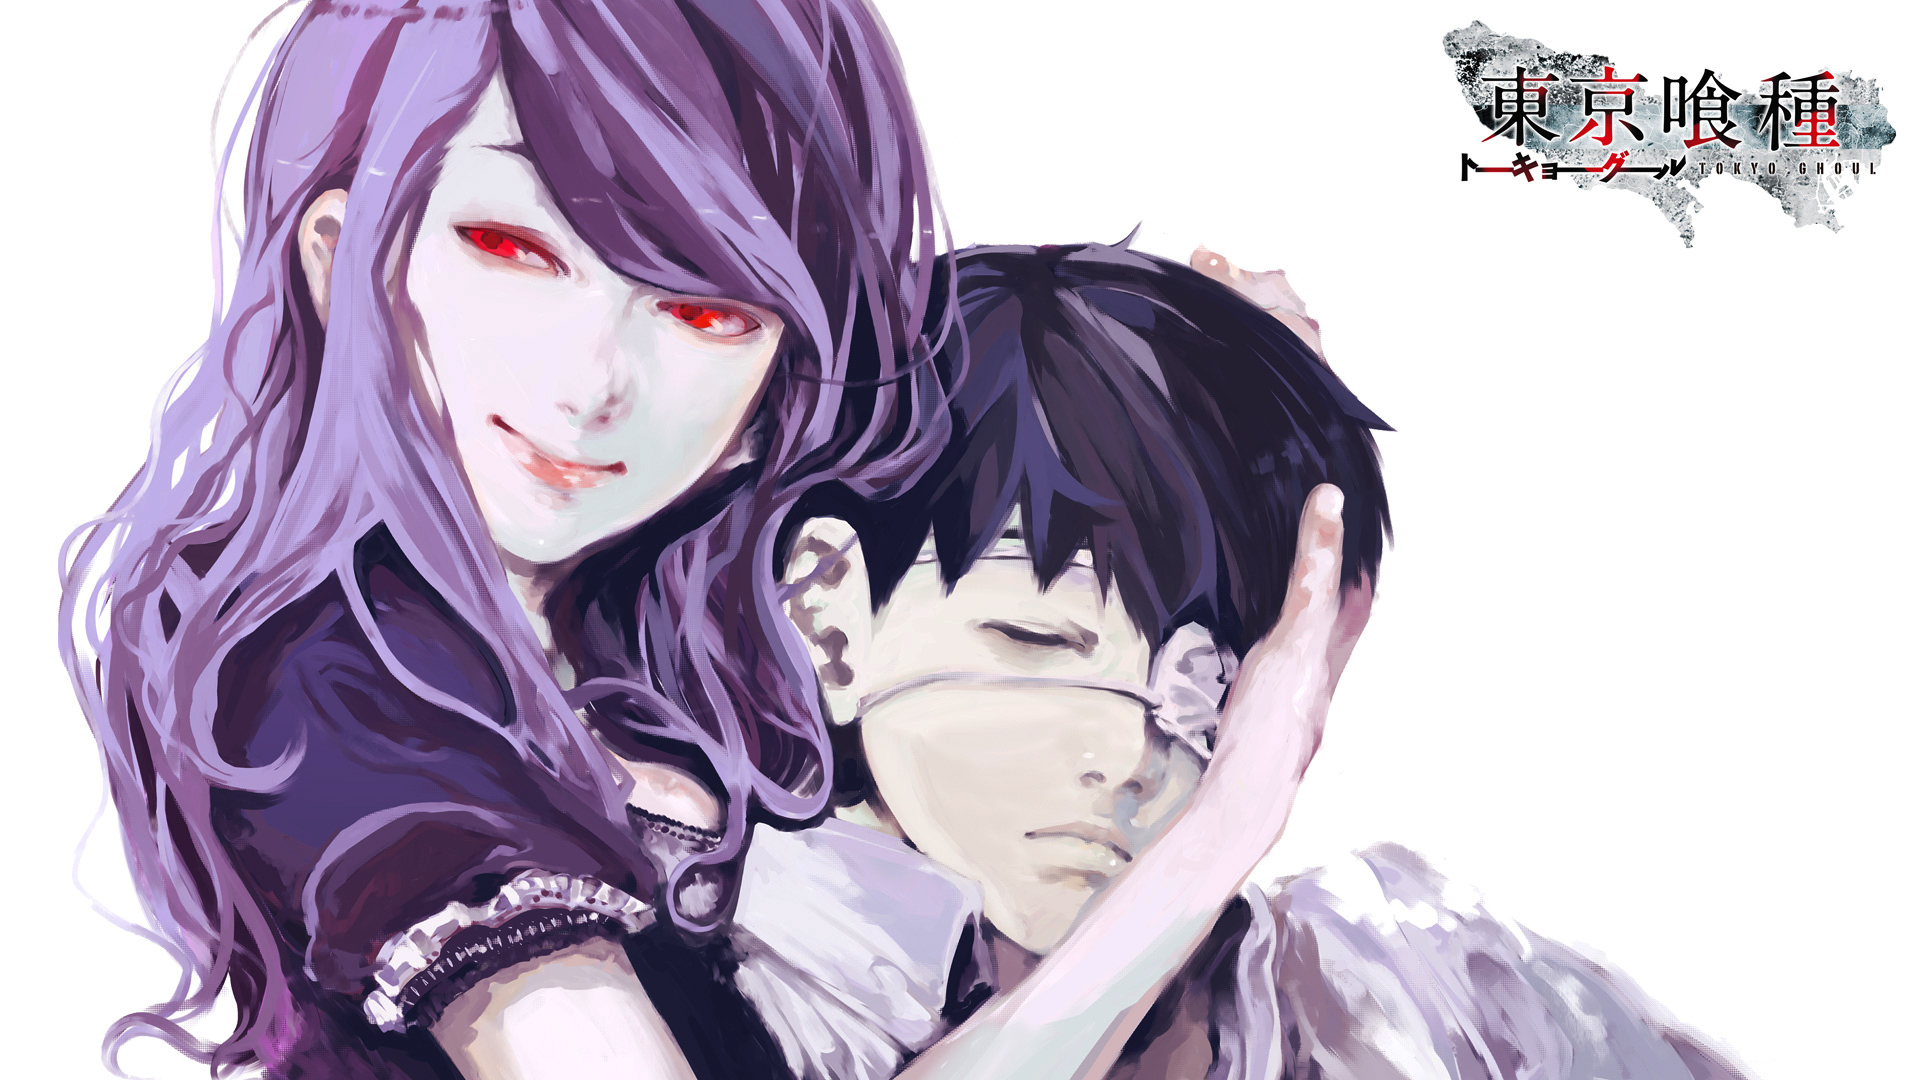 1920x1080 Free download Tokyo Ghoul Rize and Ken Wallpaper HD [] for your Desktop, Mobile \u0026 Tablet | Explore 49+ Tokyo Ghoul Rize Wallpaper | Touka Tokyo Ghoul Wallpaper, Tokyo Ghoul Re Wallpaper